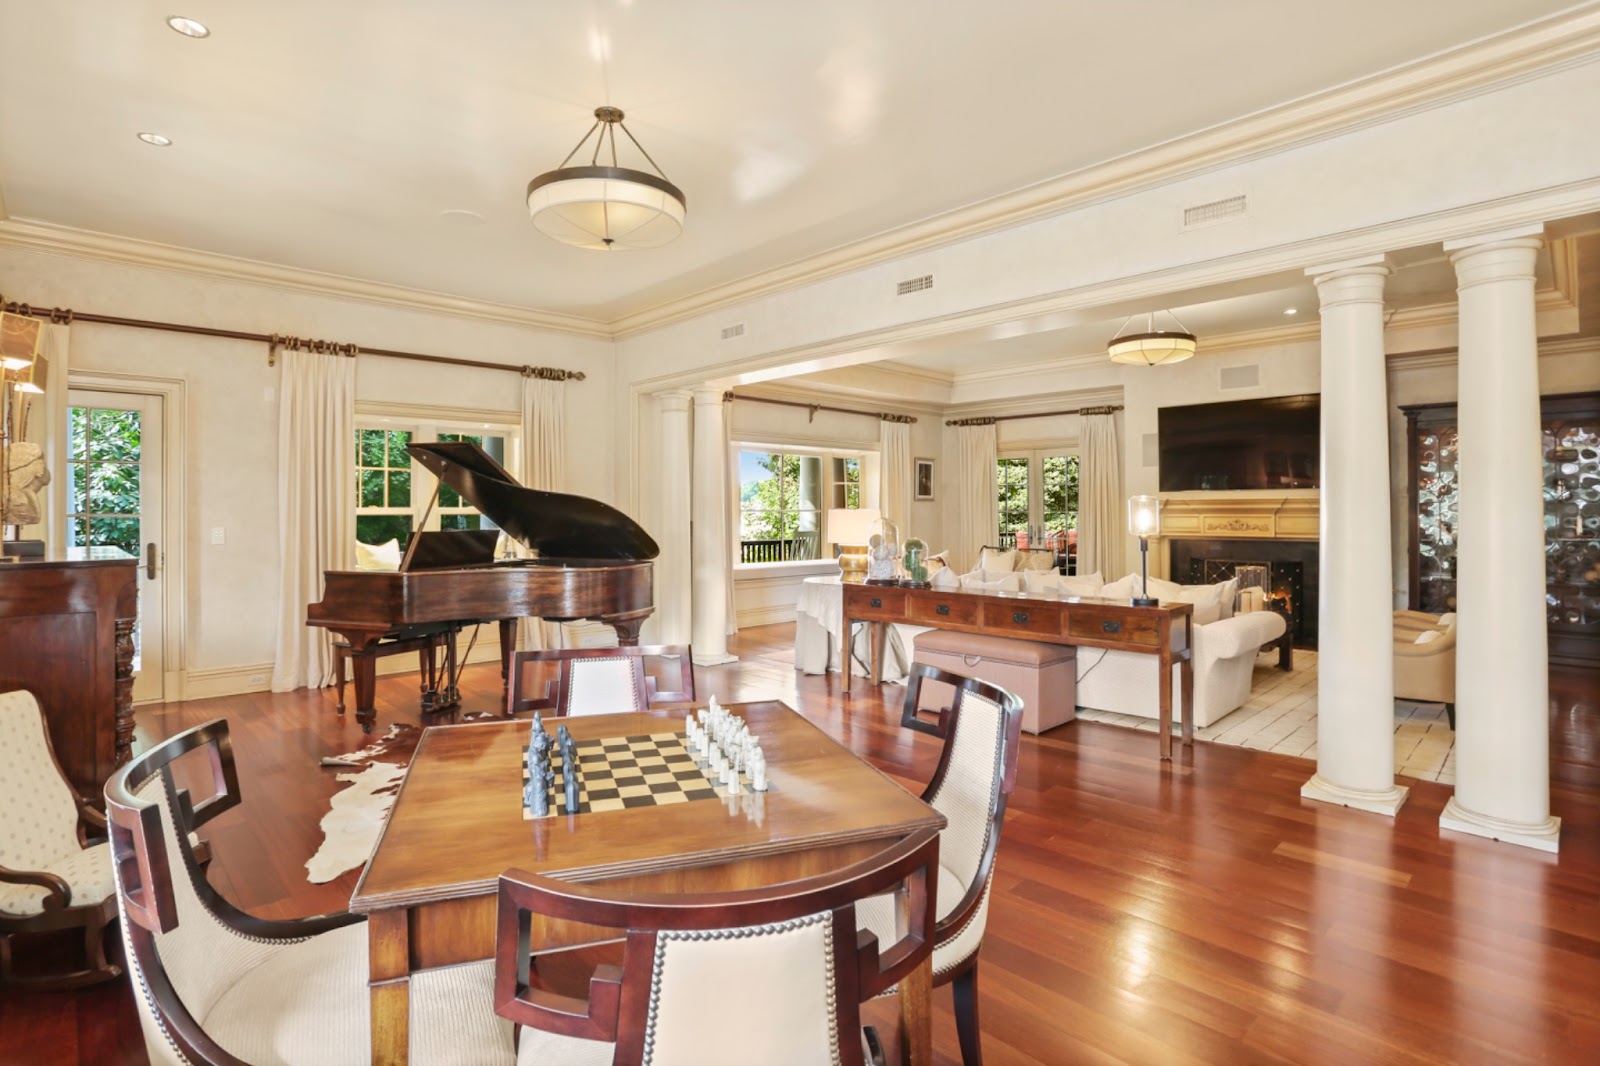 Classically styled music and game room features a blend of creamy white walls juxtaposed with warm mahogany toned furnishings including a baby grand piano and chess-board games table